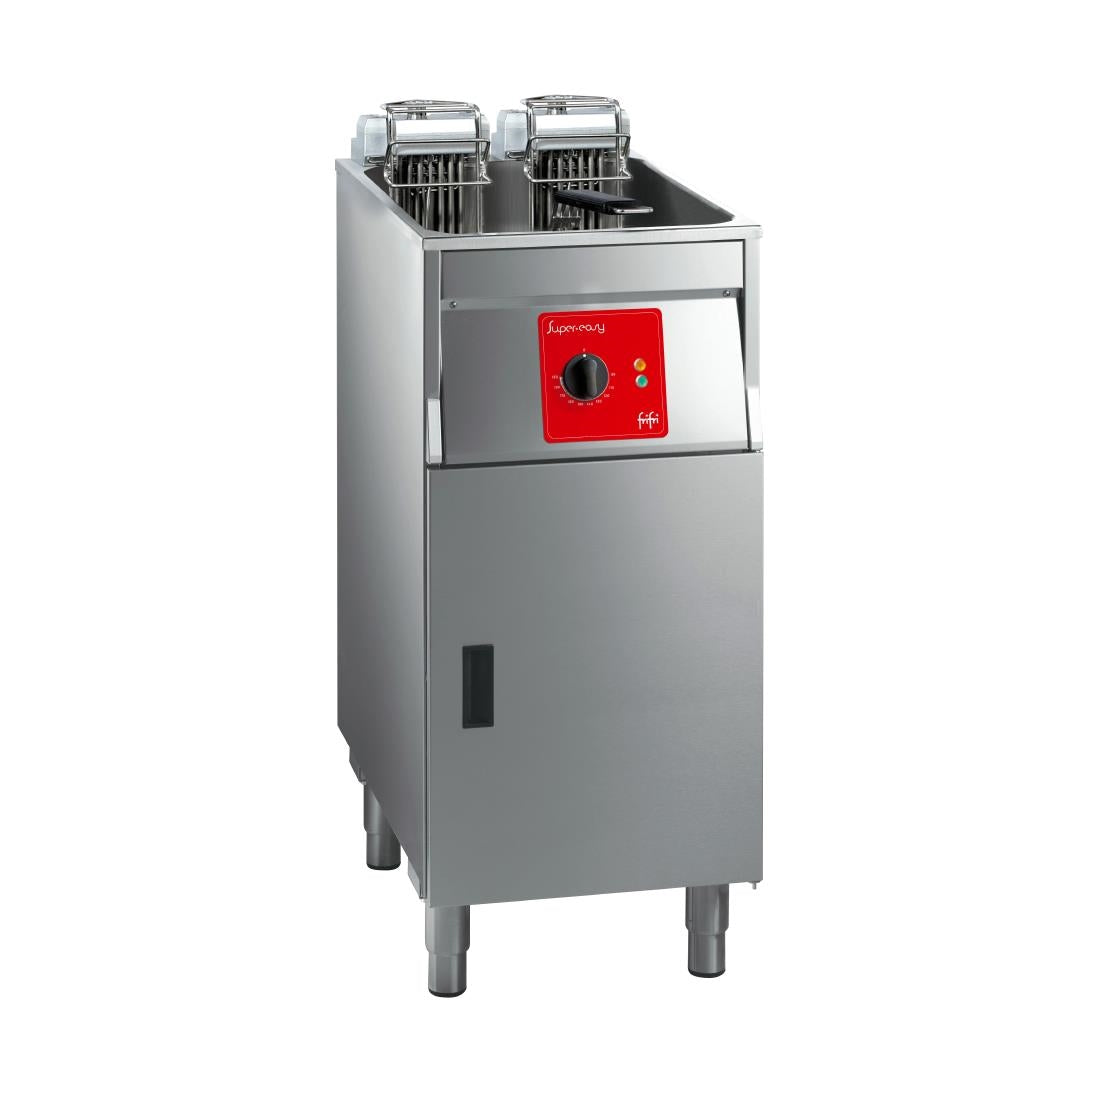 HS055-3PH FriFri Super Easy 411 Electric Free-Standing Single Tank Fryer with Filtration 1 Basket 15kW - Three Phase